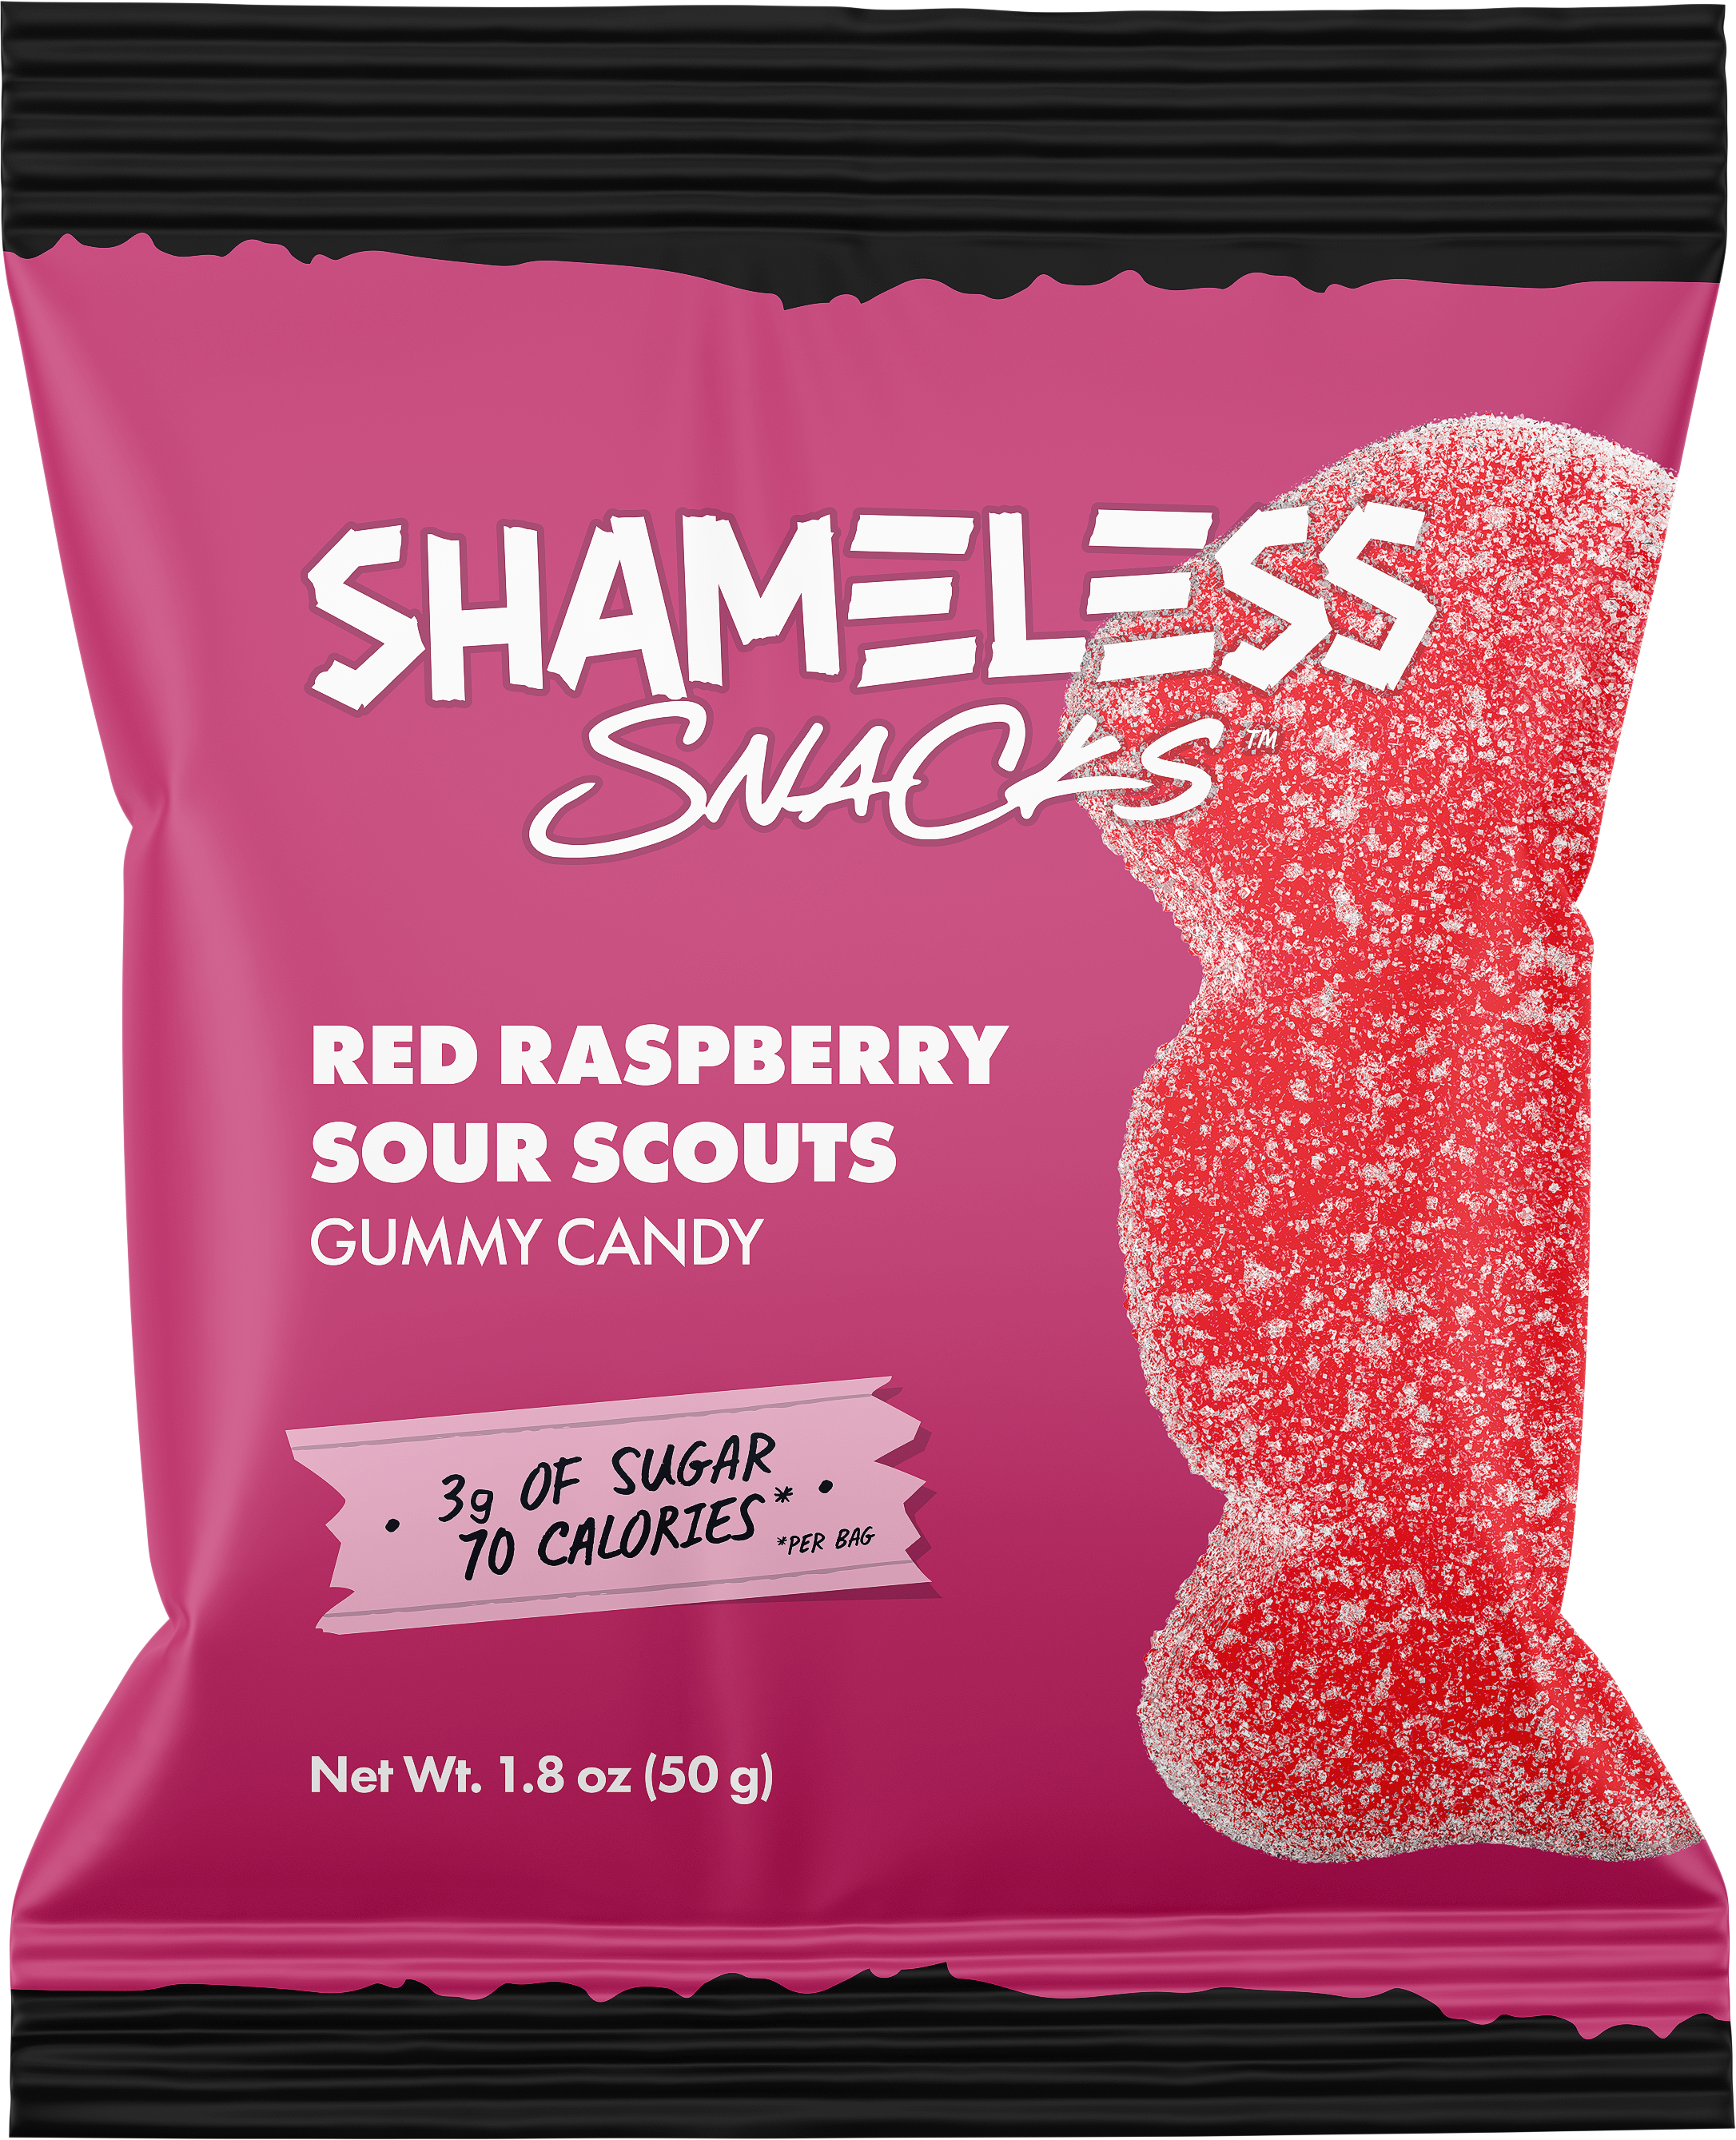 Gummy Candy by Shameless Snacks - Red Raspberry Sour Scouts - High-quality Candies by Shameless Snacks at 